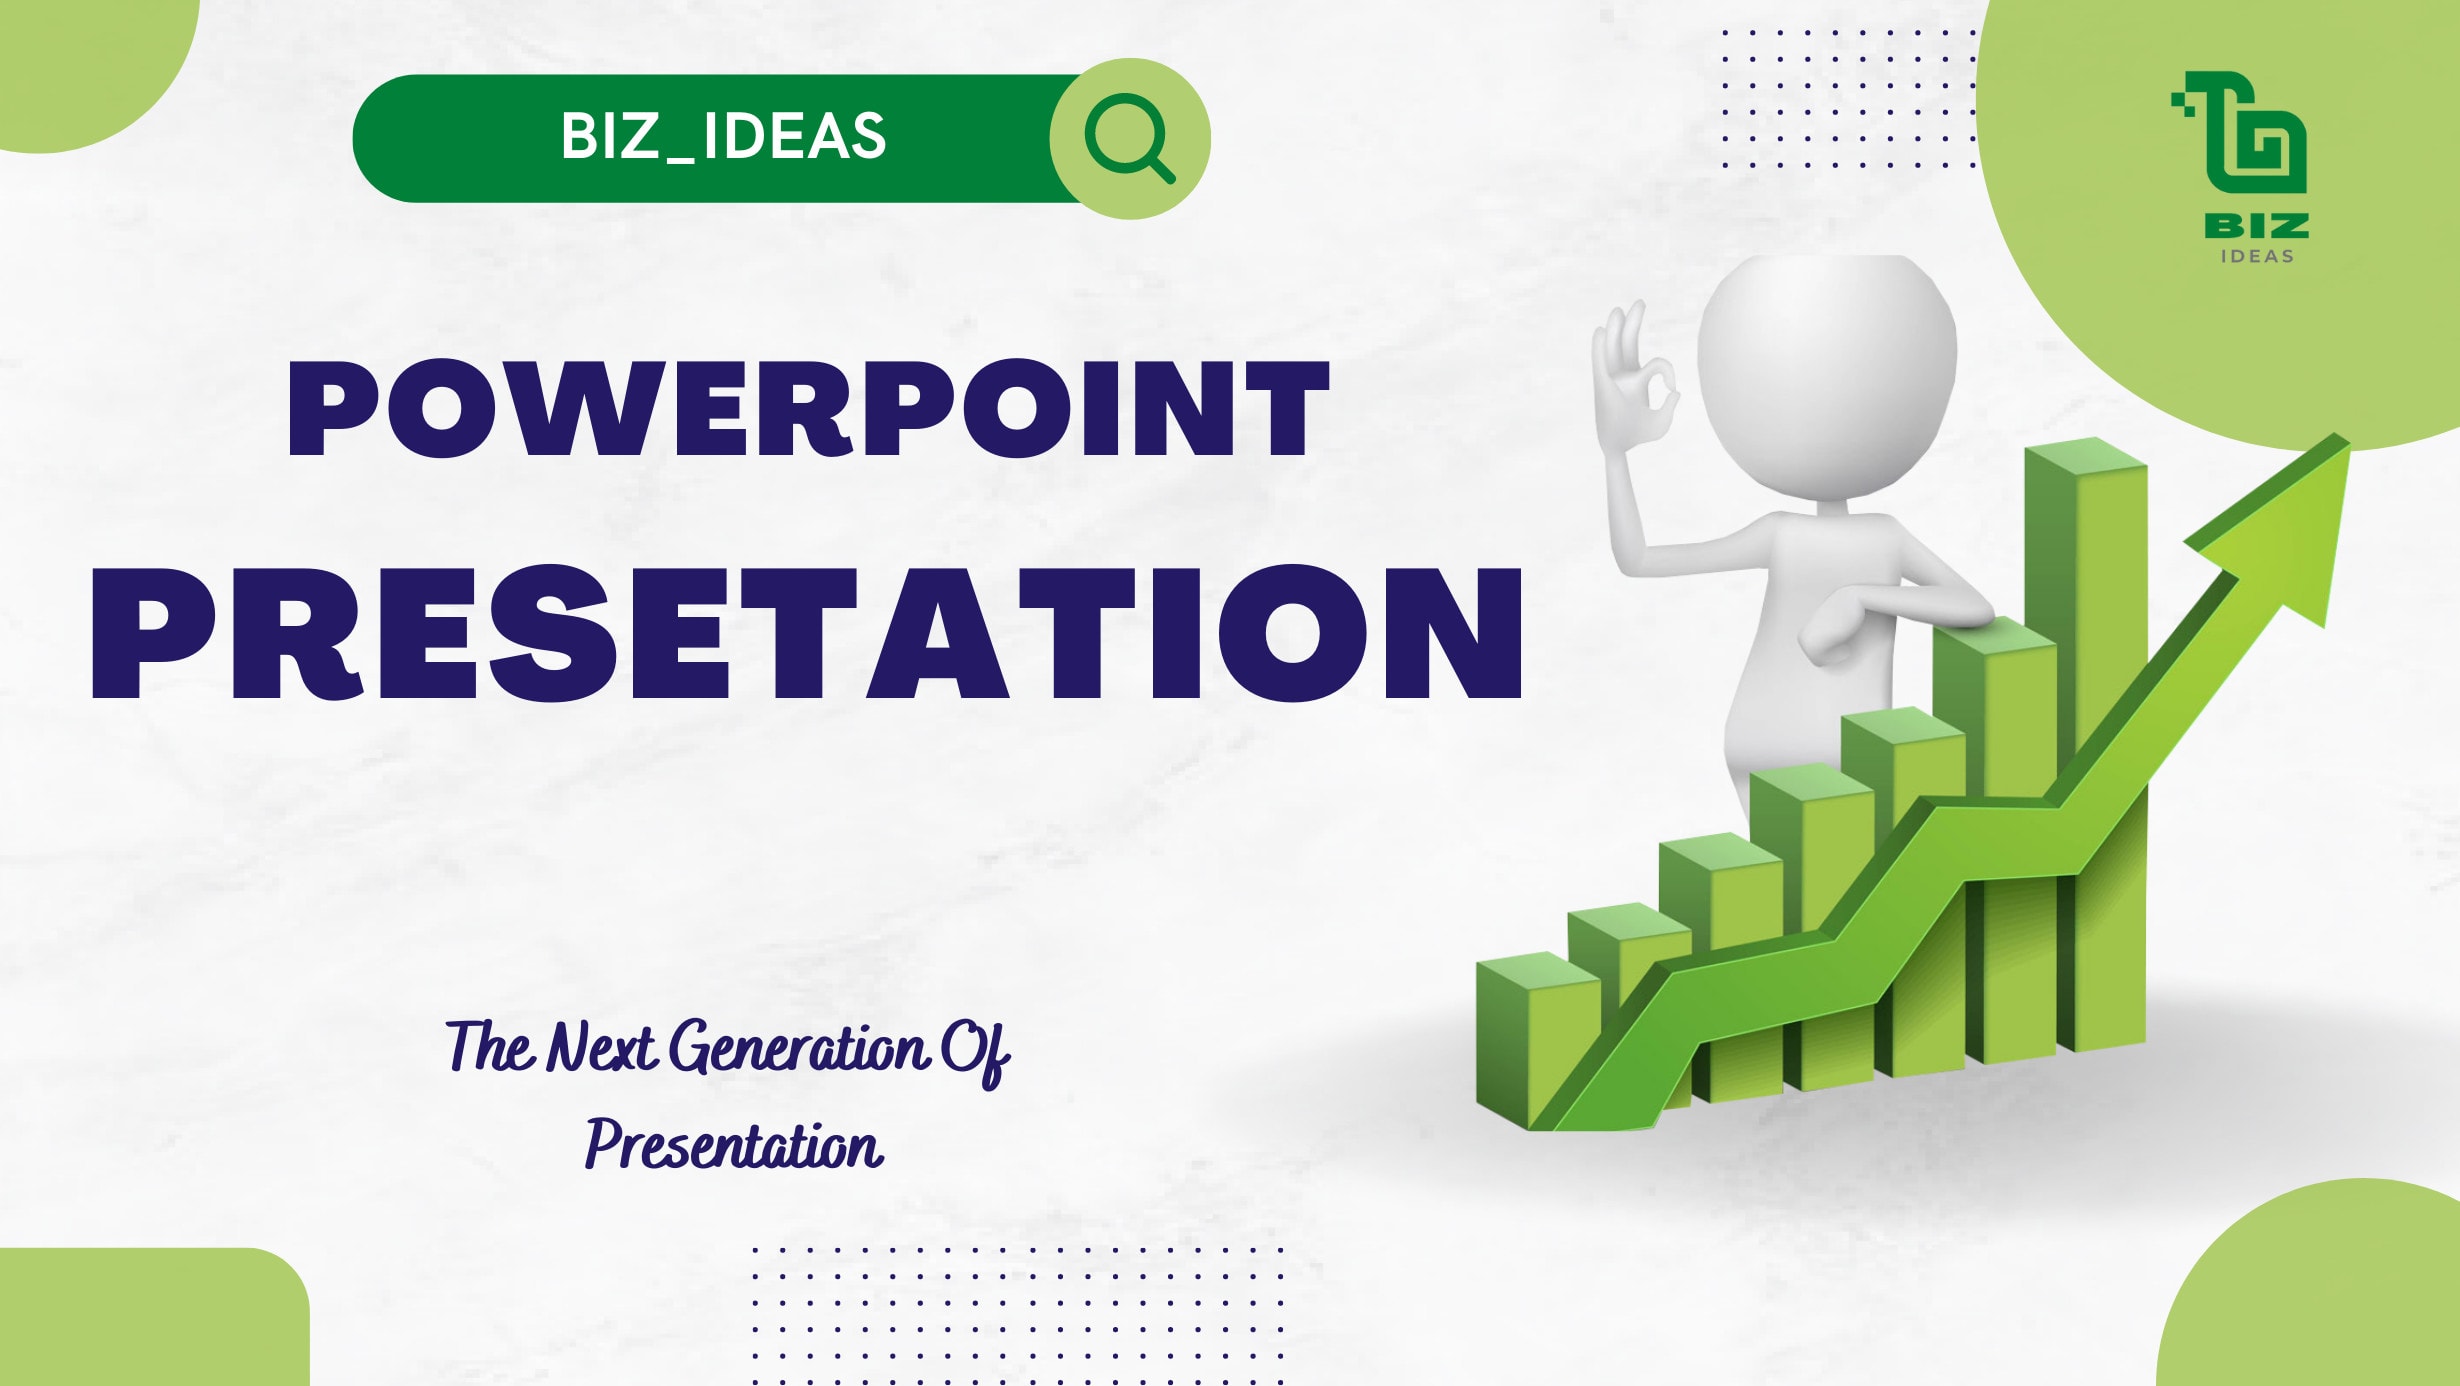 Create and redesign professional animated ppt presentation by Biz_ideas |  Fiverr